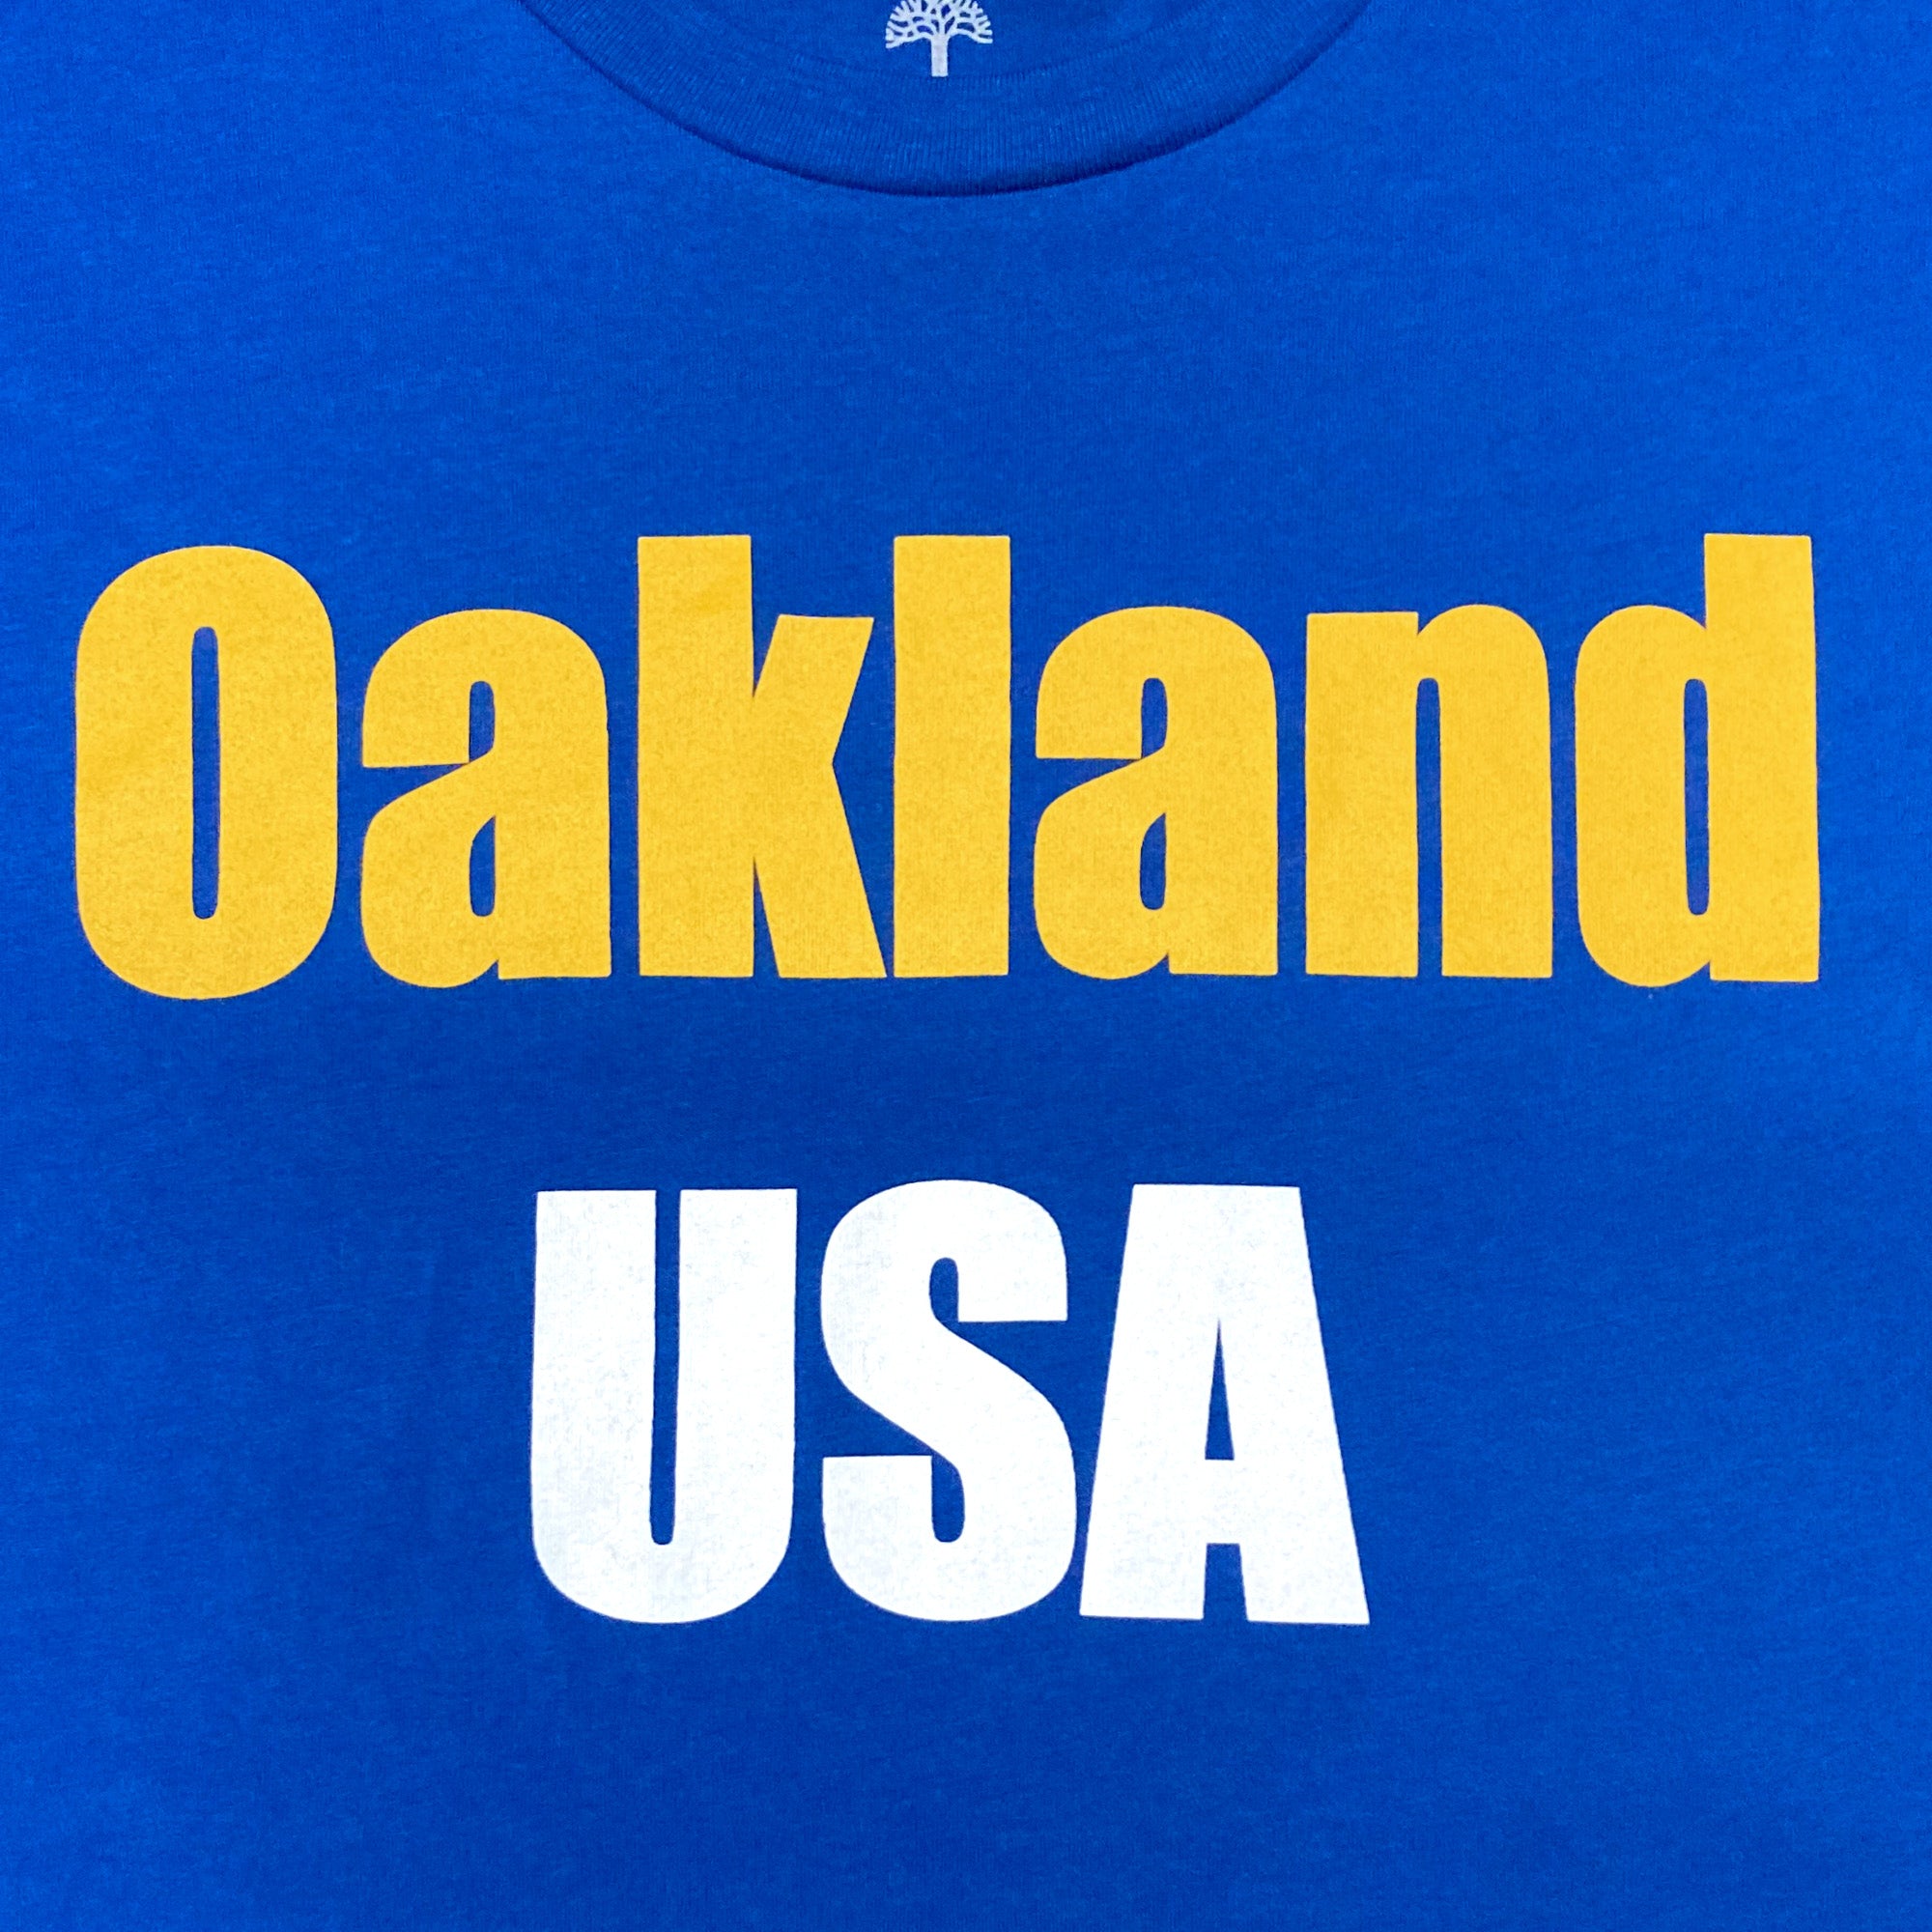 Detailed close-up image of Royal t-shirt with 'Oakland USA' wordmark across chest.